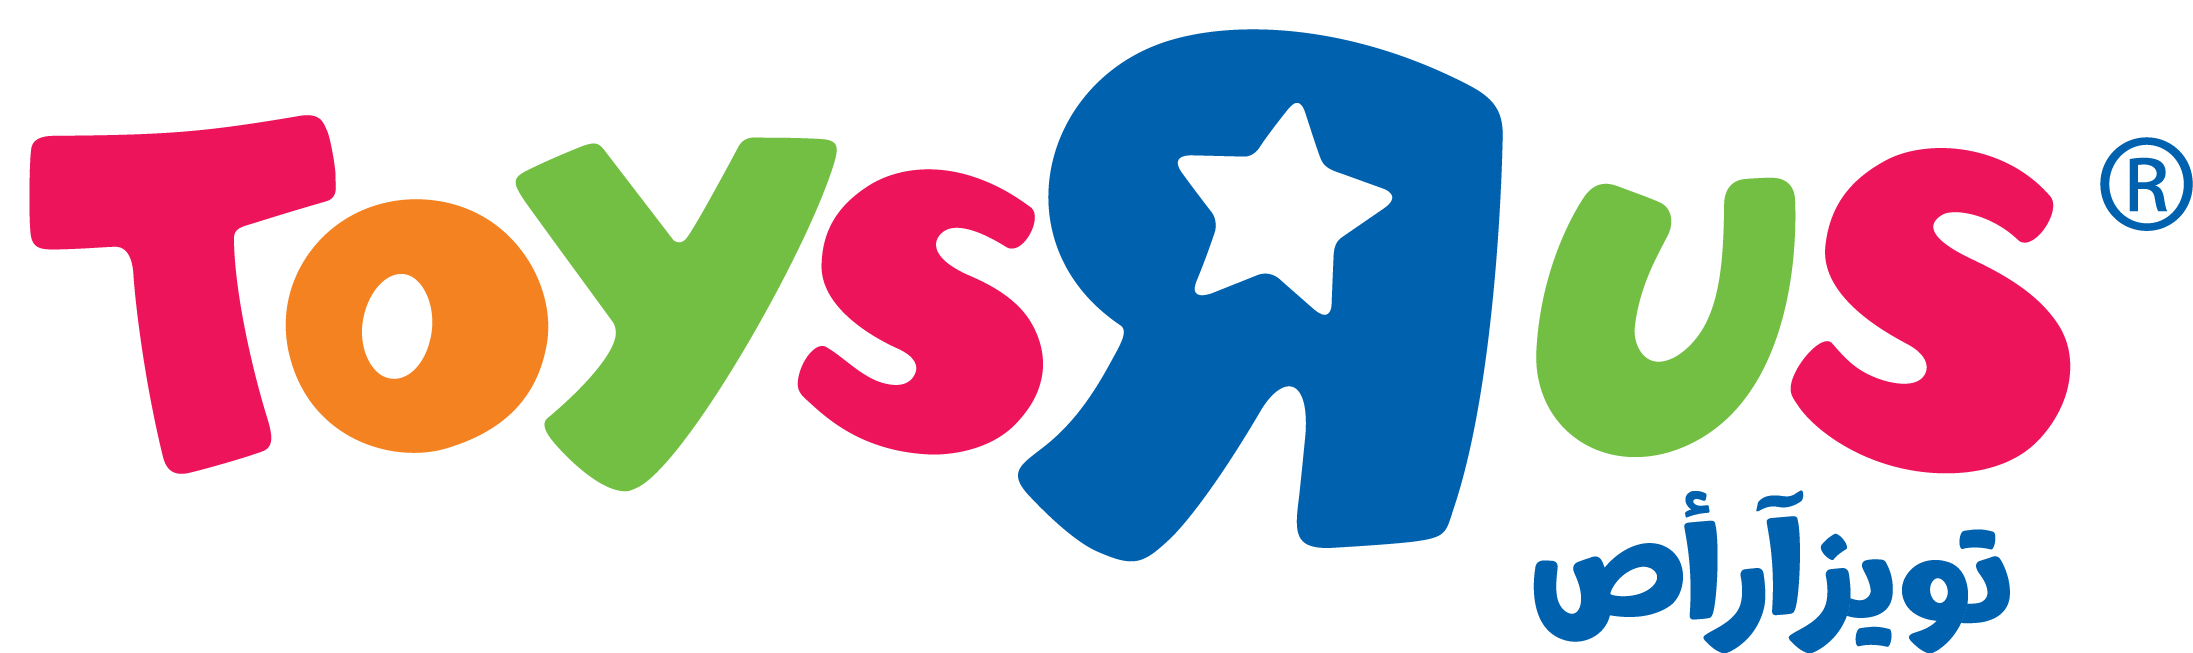 Toys R Us - Toys R Us Gift Card, (2193x653)